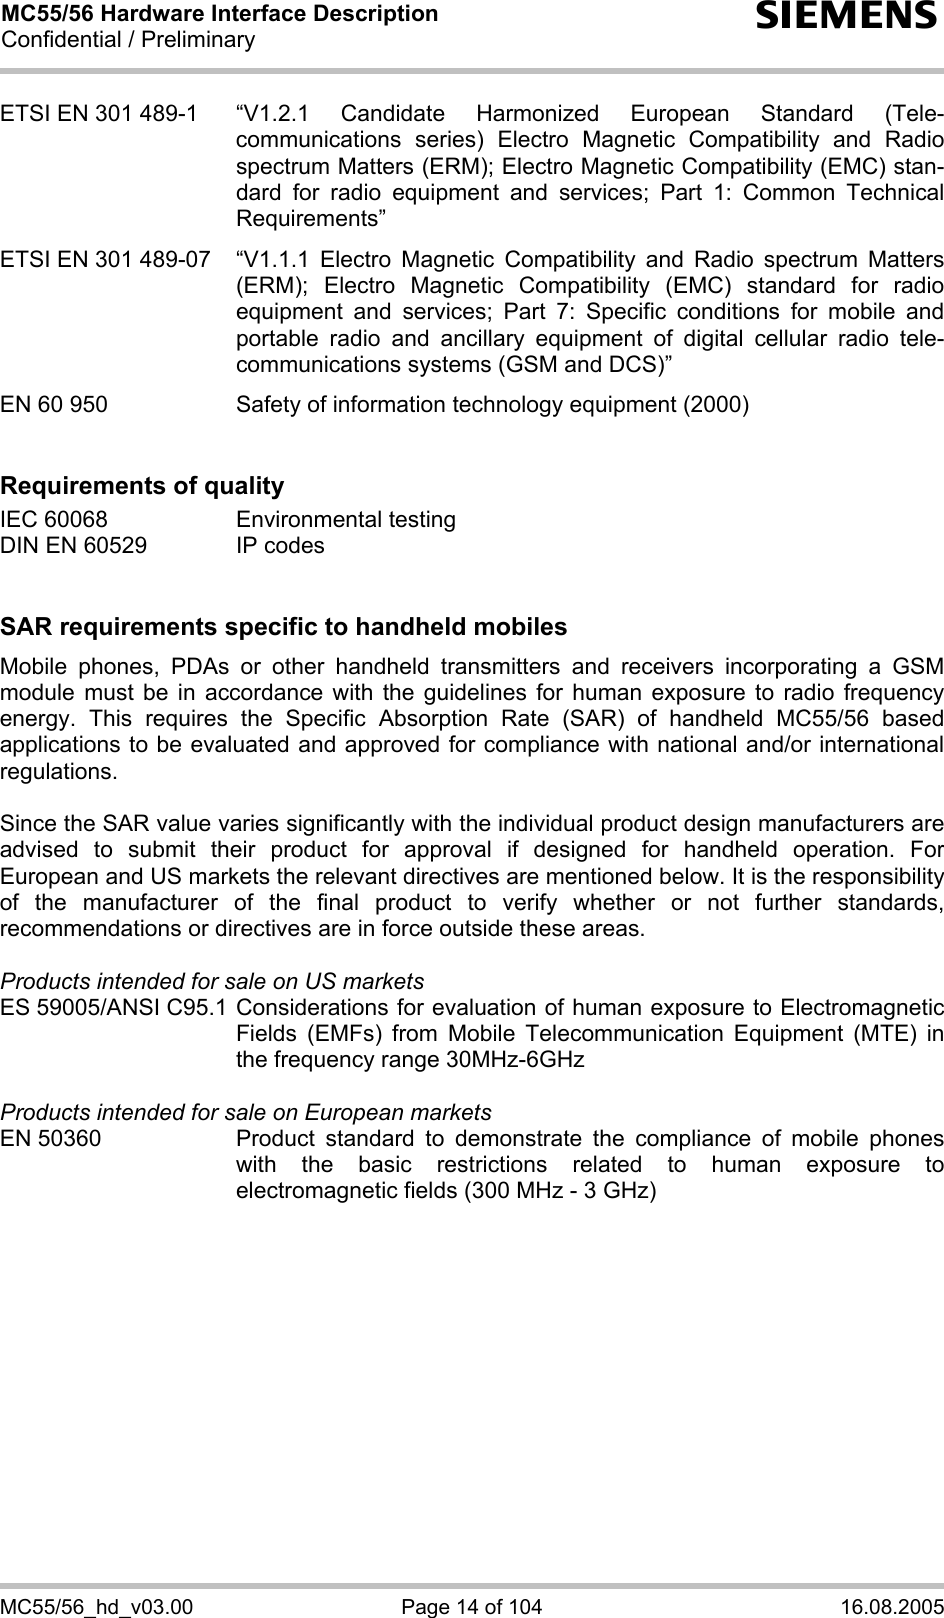 MC55/56 Hardware Interface Description Confidential / Preliminary s MC55/56_hd_v03.00  Page 14 of 104  16.08.2005 ETSI EN 301 489-1  “V1.2.1 Candidate Harmonized European Standard (Tele-communications series) Electro Magnetic Compatibility and Radio spectrum Matters (ERM); Electro Magnetic Compatibility (EMC) stan-dard for radio equipment and services; Part 1: Common Technical Requirements”  ETSI EN 301 489-07  “V1.1.1 Electro Magnetic Compatibility and Radio spectrum Matters (ERM); Electro Magnetic Compatibility (EMC) standard for radio equipment and services; Part 7: Specific conditions for mobile and portable radio and ancillary equipment of digital cellular radio tele-communications systems (GSM and DCS)”   EN 60 950  Safety of information technology equipment (2000)   Requirements of quality IEC 60068  Environmental testing DIN EN 60529  IP codes   SAR requirements specific to handheld mobiles Mobile phones, PDAs or other handheld transmitters and receivers incorporating a GSM module must be in accordance with the guidelines for human exposure to radio frequency energy. This requires the Specific Absorption Rate (SAR) of handheld MC55/56 based applications to be evaluated and approved for compliance with national and/or international regulations.   Since the SAR value varies significantly with the individual product design manufacturers are advised to submit their product for approval if designed for handheld operation. For European and US markets the relevant directives are mentioned below. It is the responsibility of the manufacturer of the final product to verify whether or not further standards, recommendations or directives are in force outside these areas.   Products intended for sale on US markets ES 59005/ANSI C95.1 Considerations for evaluation of human exposure to Electromagnetic Fields (EMFs) from Mobile Telecommunication Equipment (MTE) in the frequency range 30MHz-6GHz   Products intended for sale on European markets EN 50360  Product standard to demonstrate the compliance of mobile phones with the basic restrictions related to human exposure to electromagnetic fields (300 MHz - 3 GHz)  